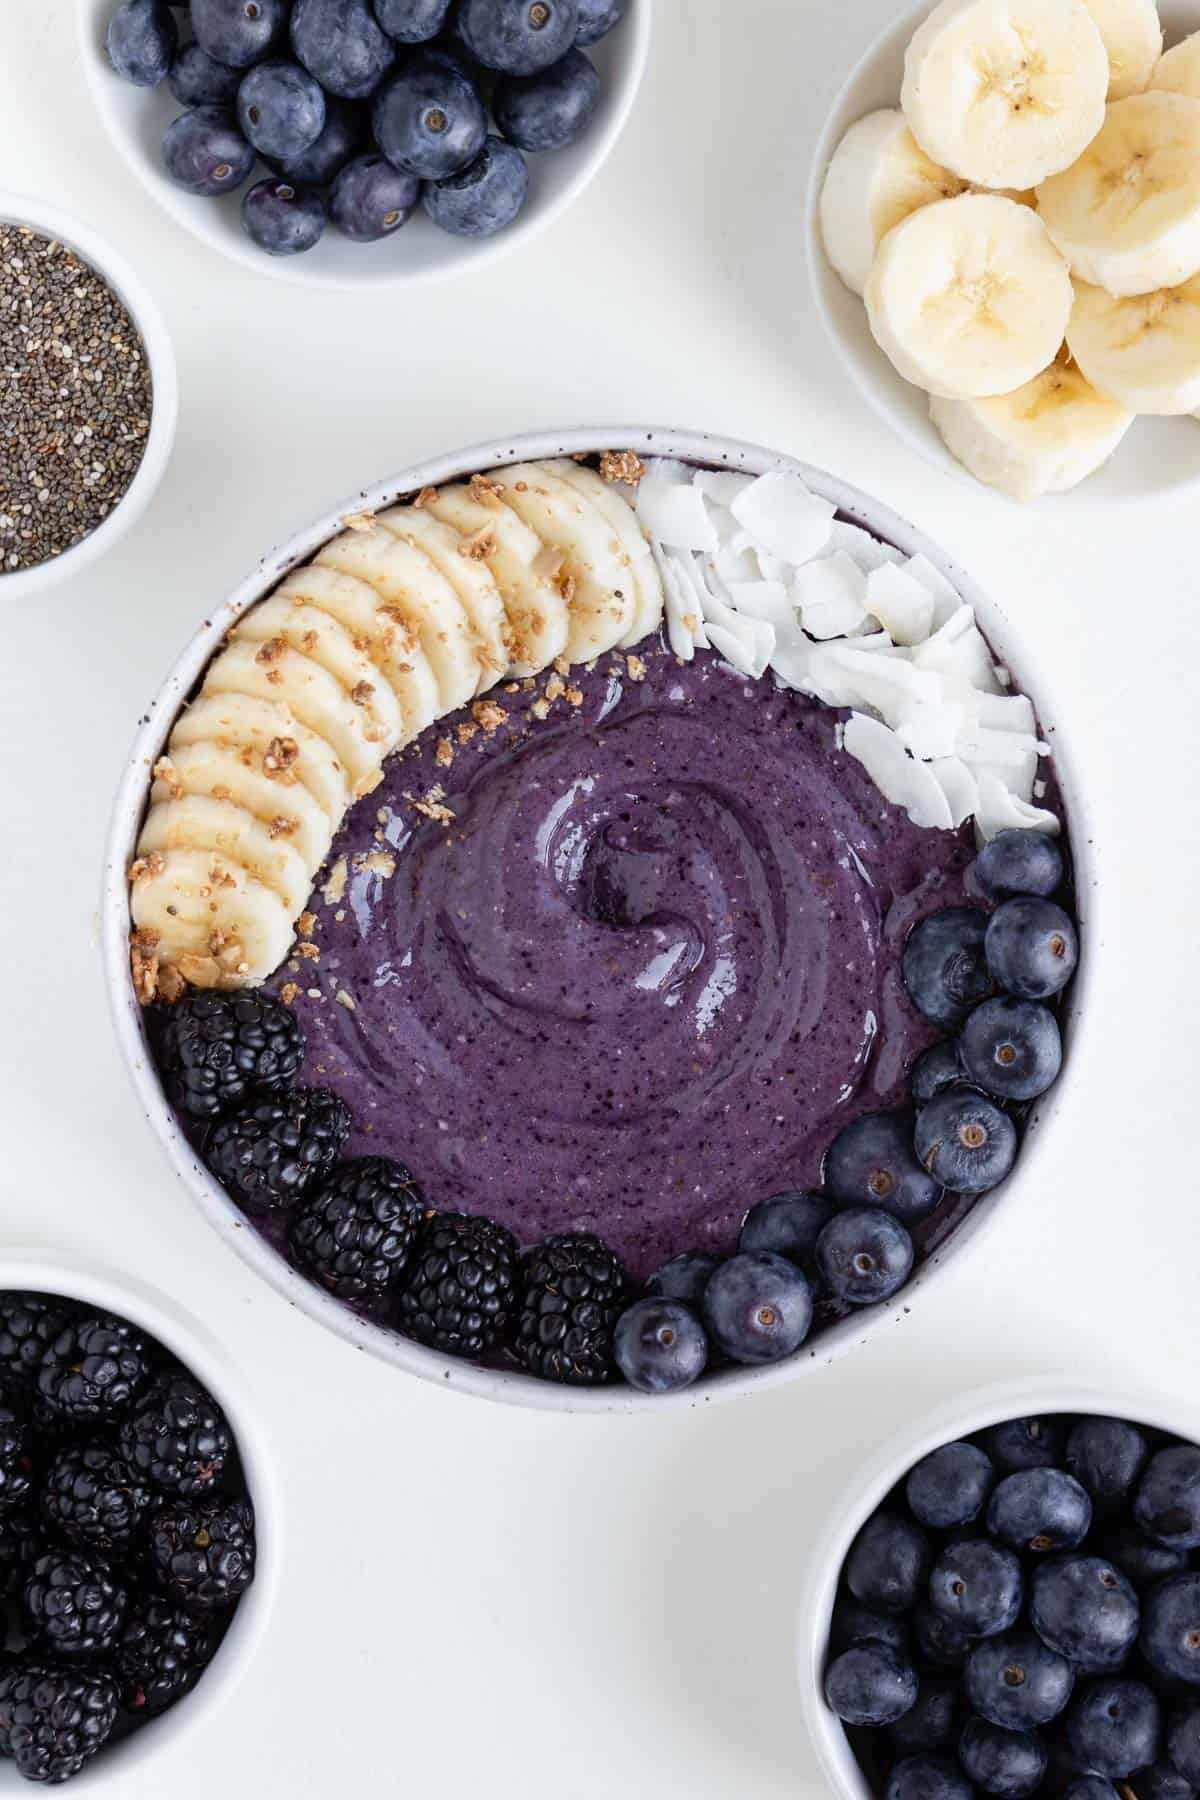 a purple blueberry banana smoothie bowl surrounded by bowls of chia seeds, blueberries, blackberries, and sliced banana